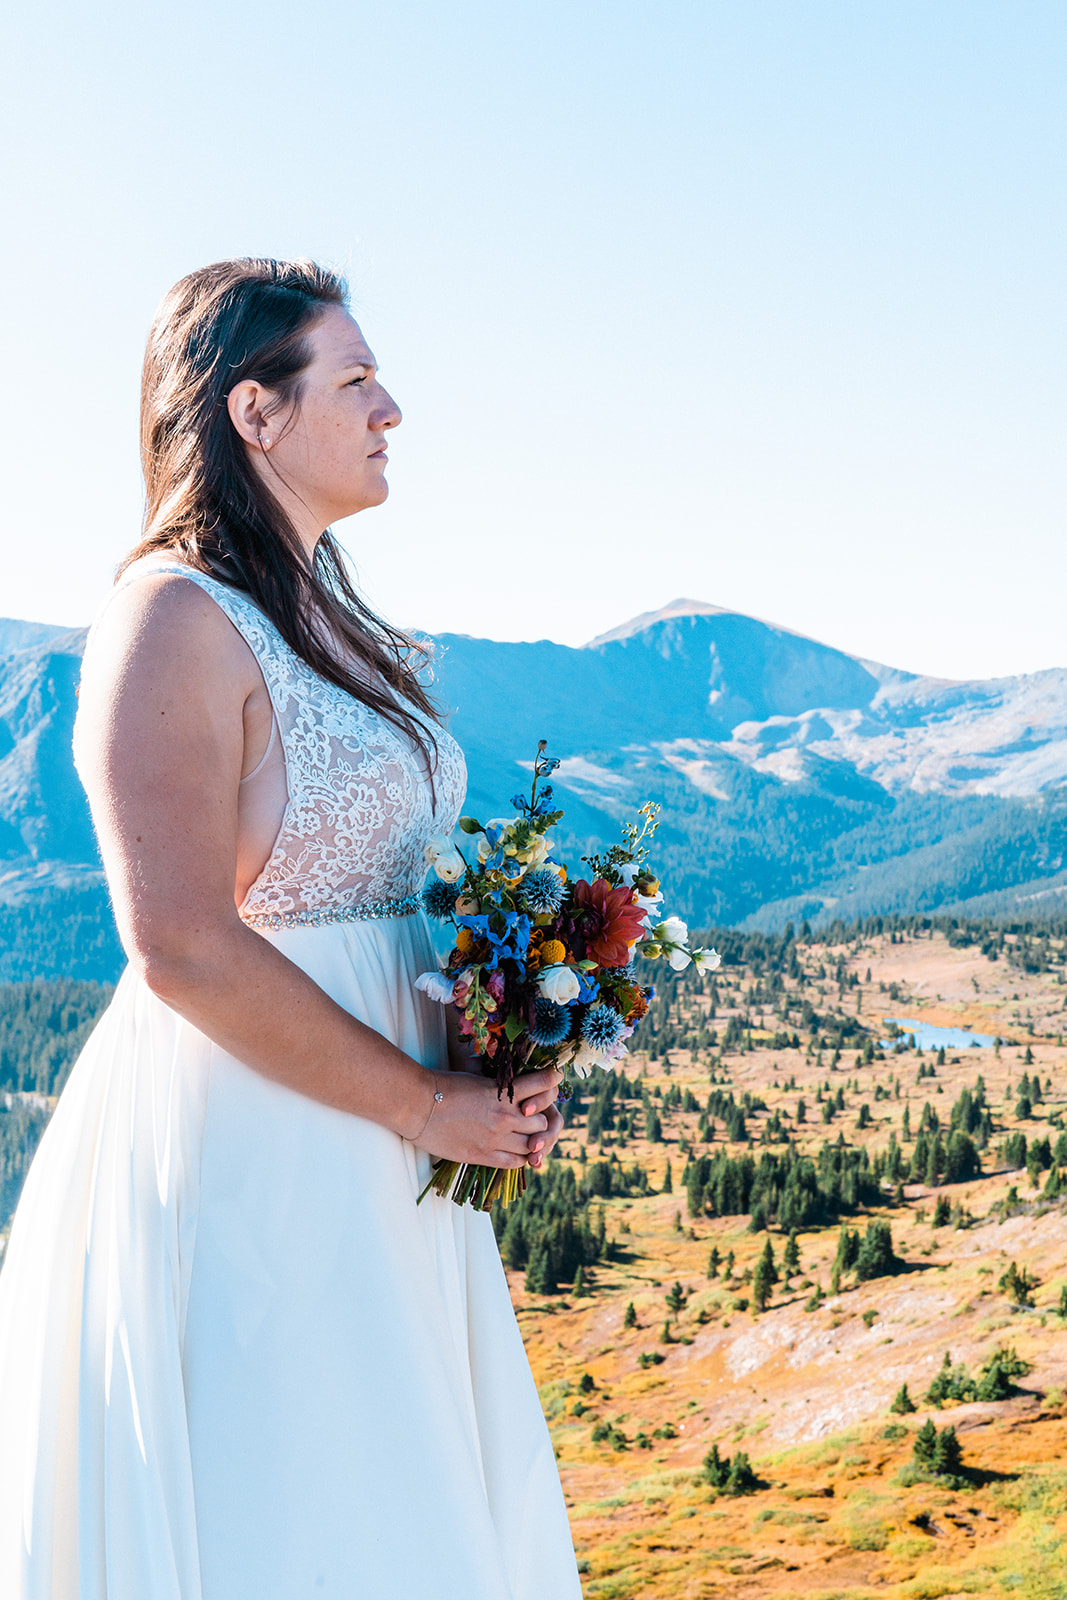 Beautiful bride looking off into the distance holding a colorful bridal bouquet